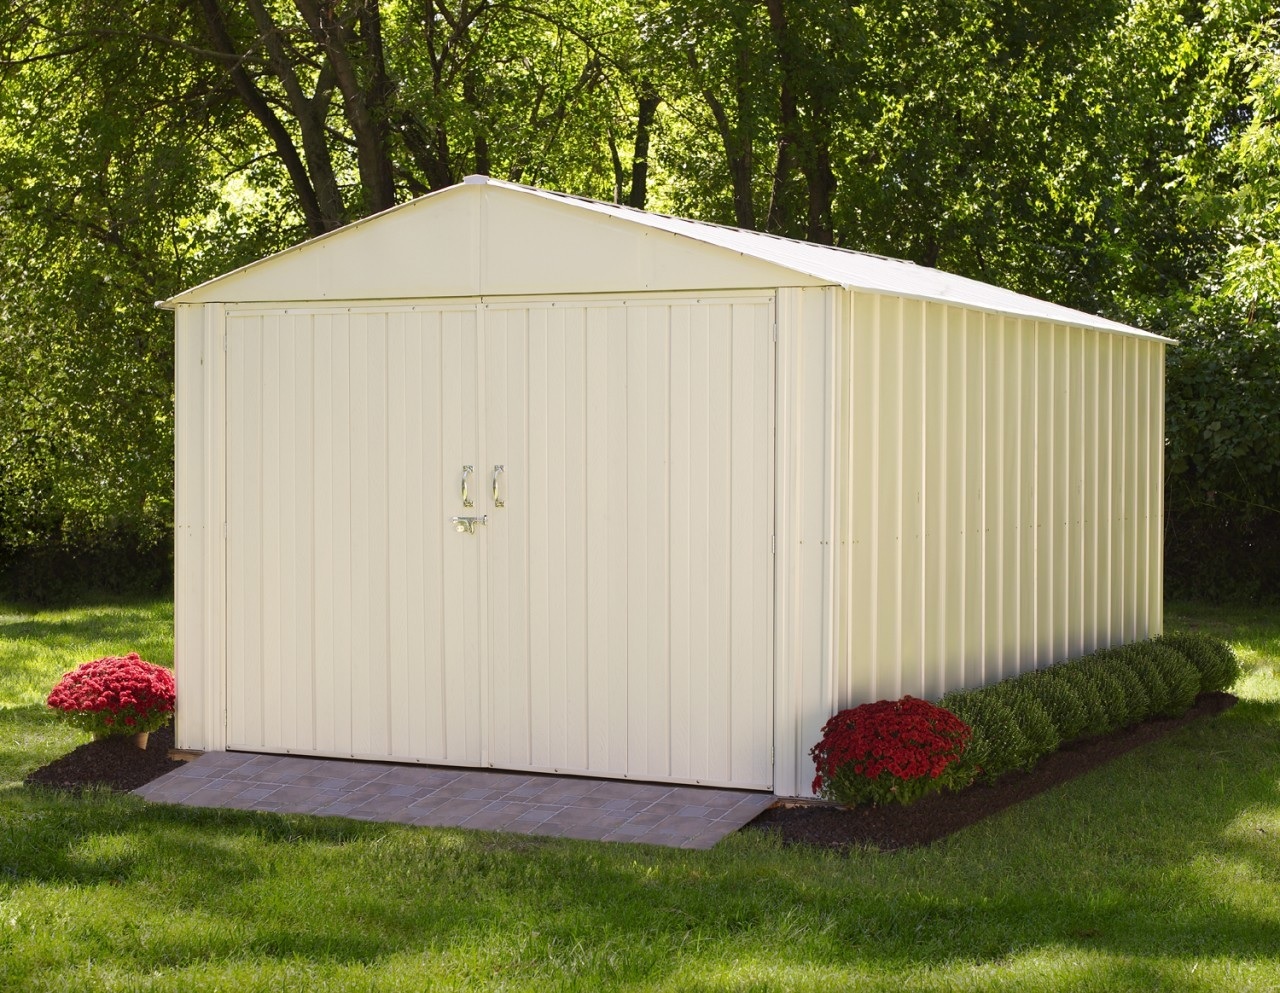 Wood Storage Shed Kit : How to build a 10x10 metal shed